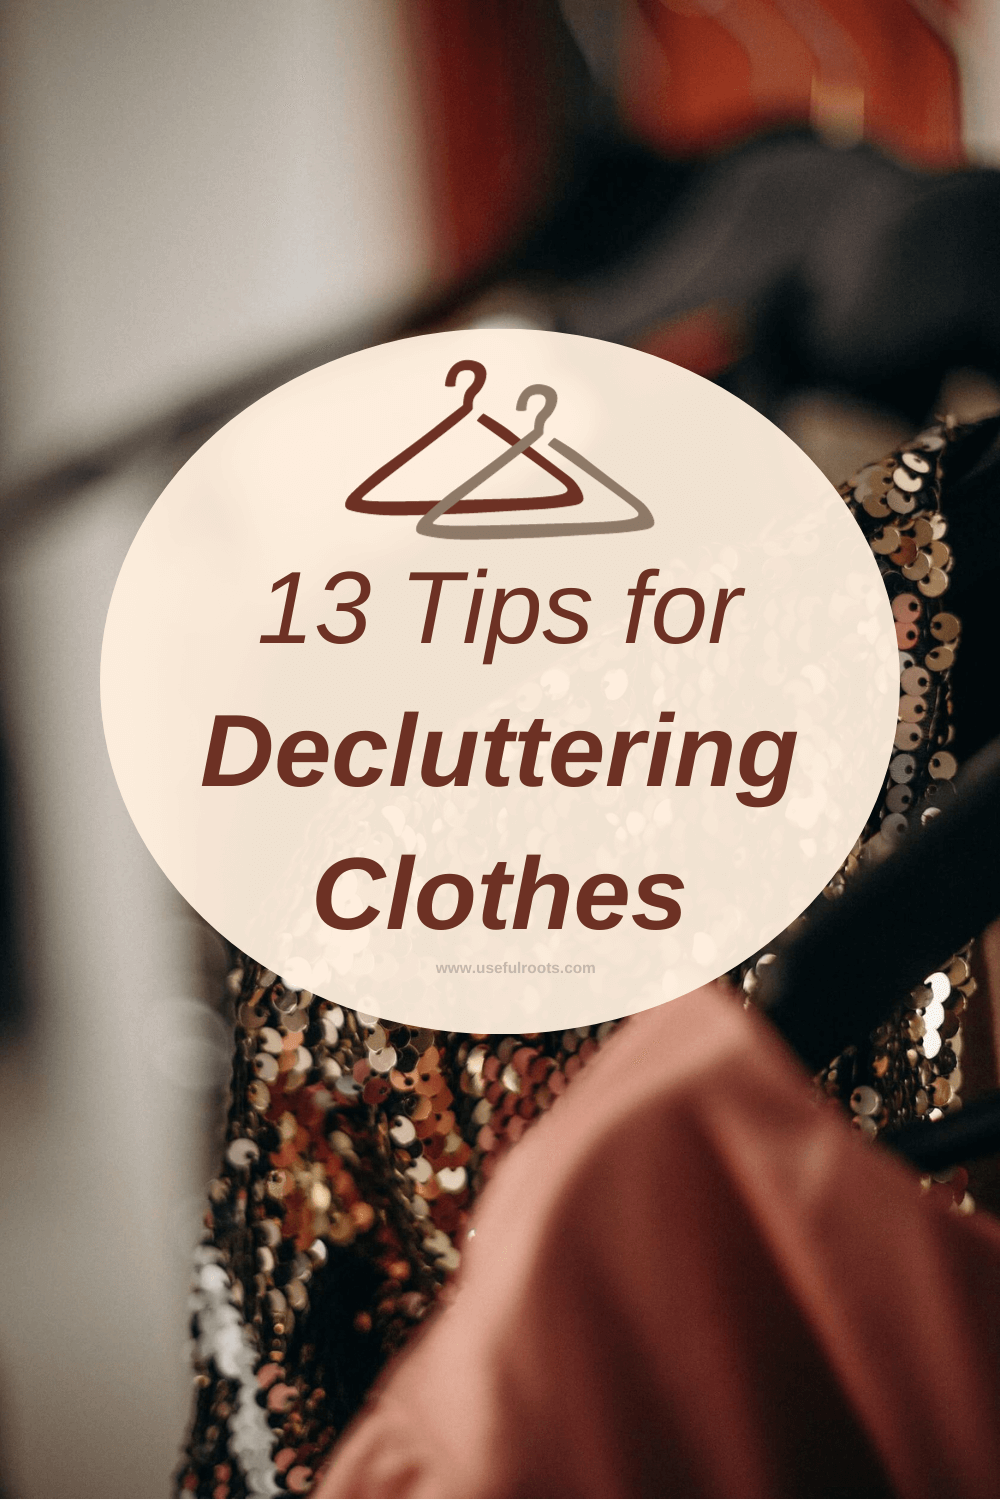 13 Tips for Decluttering Clothes — Useful Roots